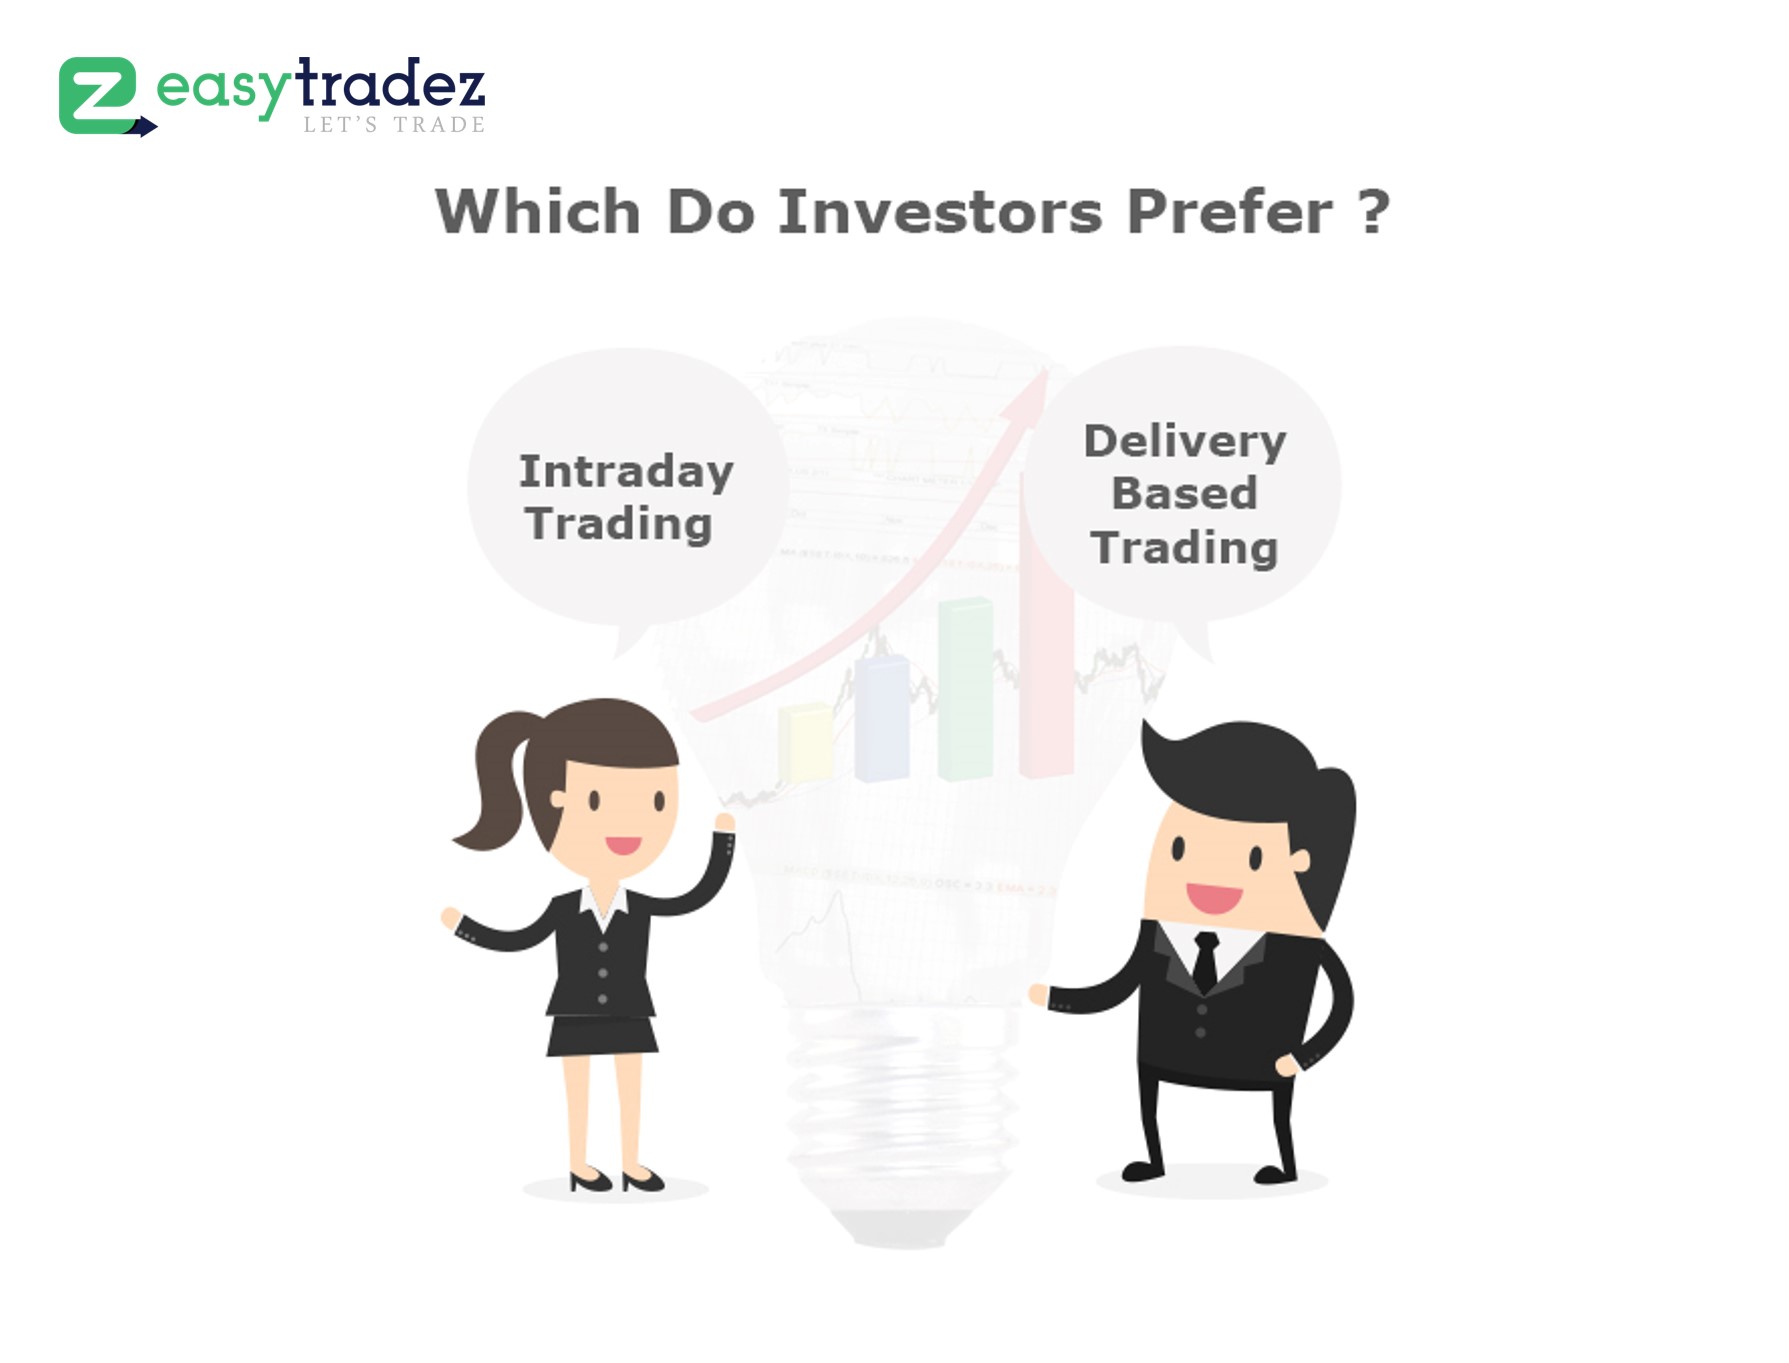 Intraday Trading or Delivery Trading: Which Do Investors Prefer?